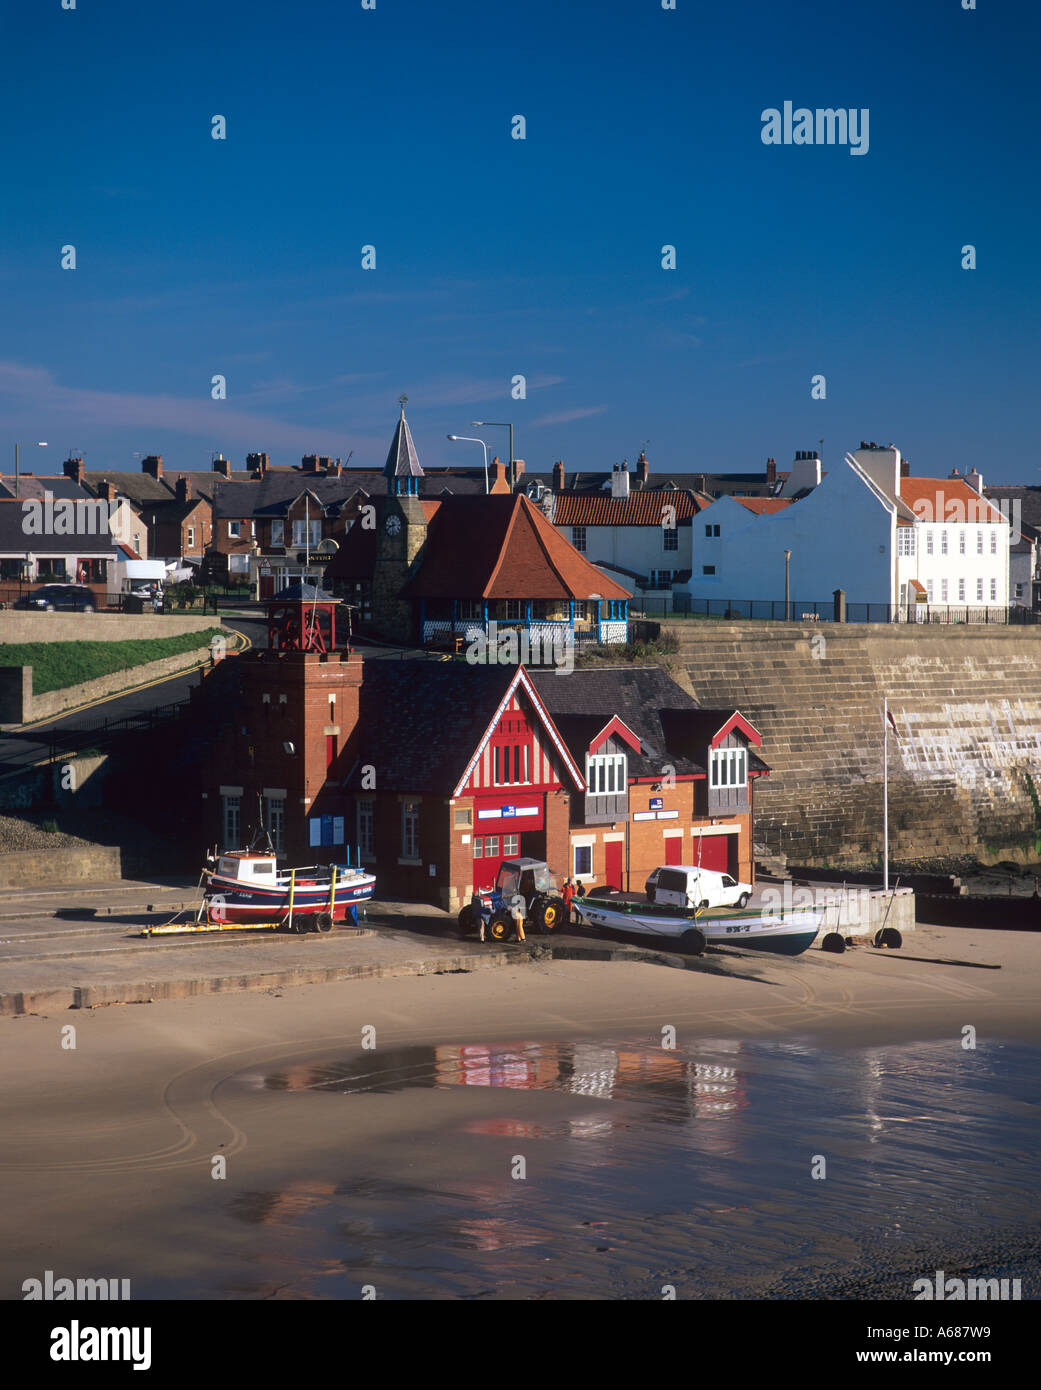 The Old Lifeboat Station Cullercoats Tyne and Wear England UK Stock Photo